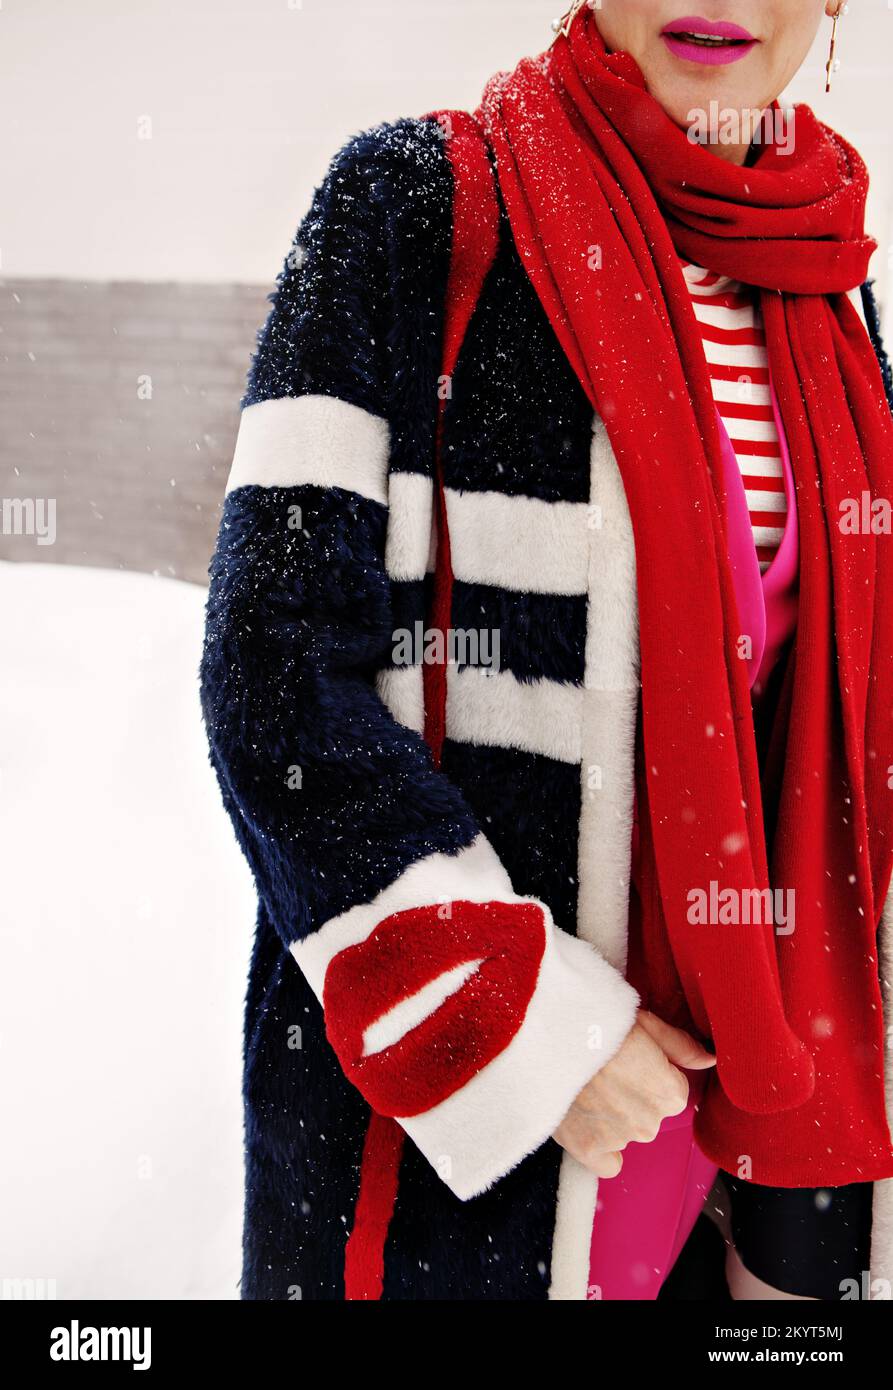 Woman hand in fake fur jacket with lips, stylish female sleeve detail in red scarf and fashionable coat Stock Photo